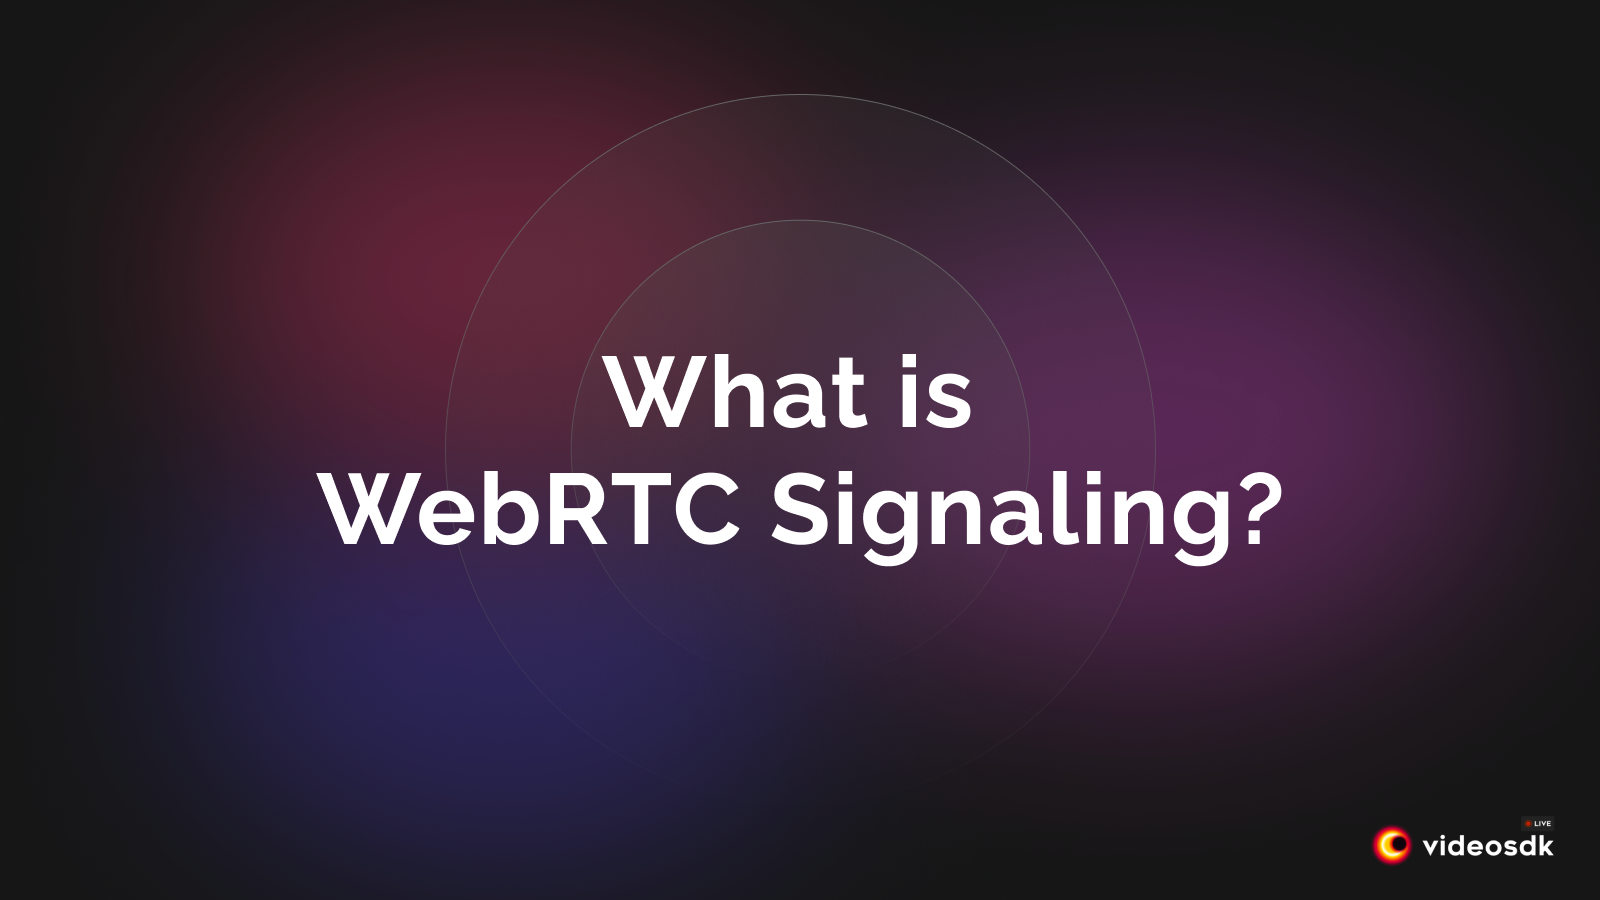 What is WebRTC Signaling? How Does WebRTC Signaling Work?